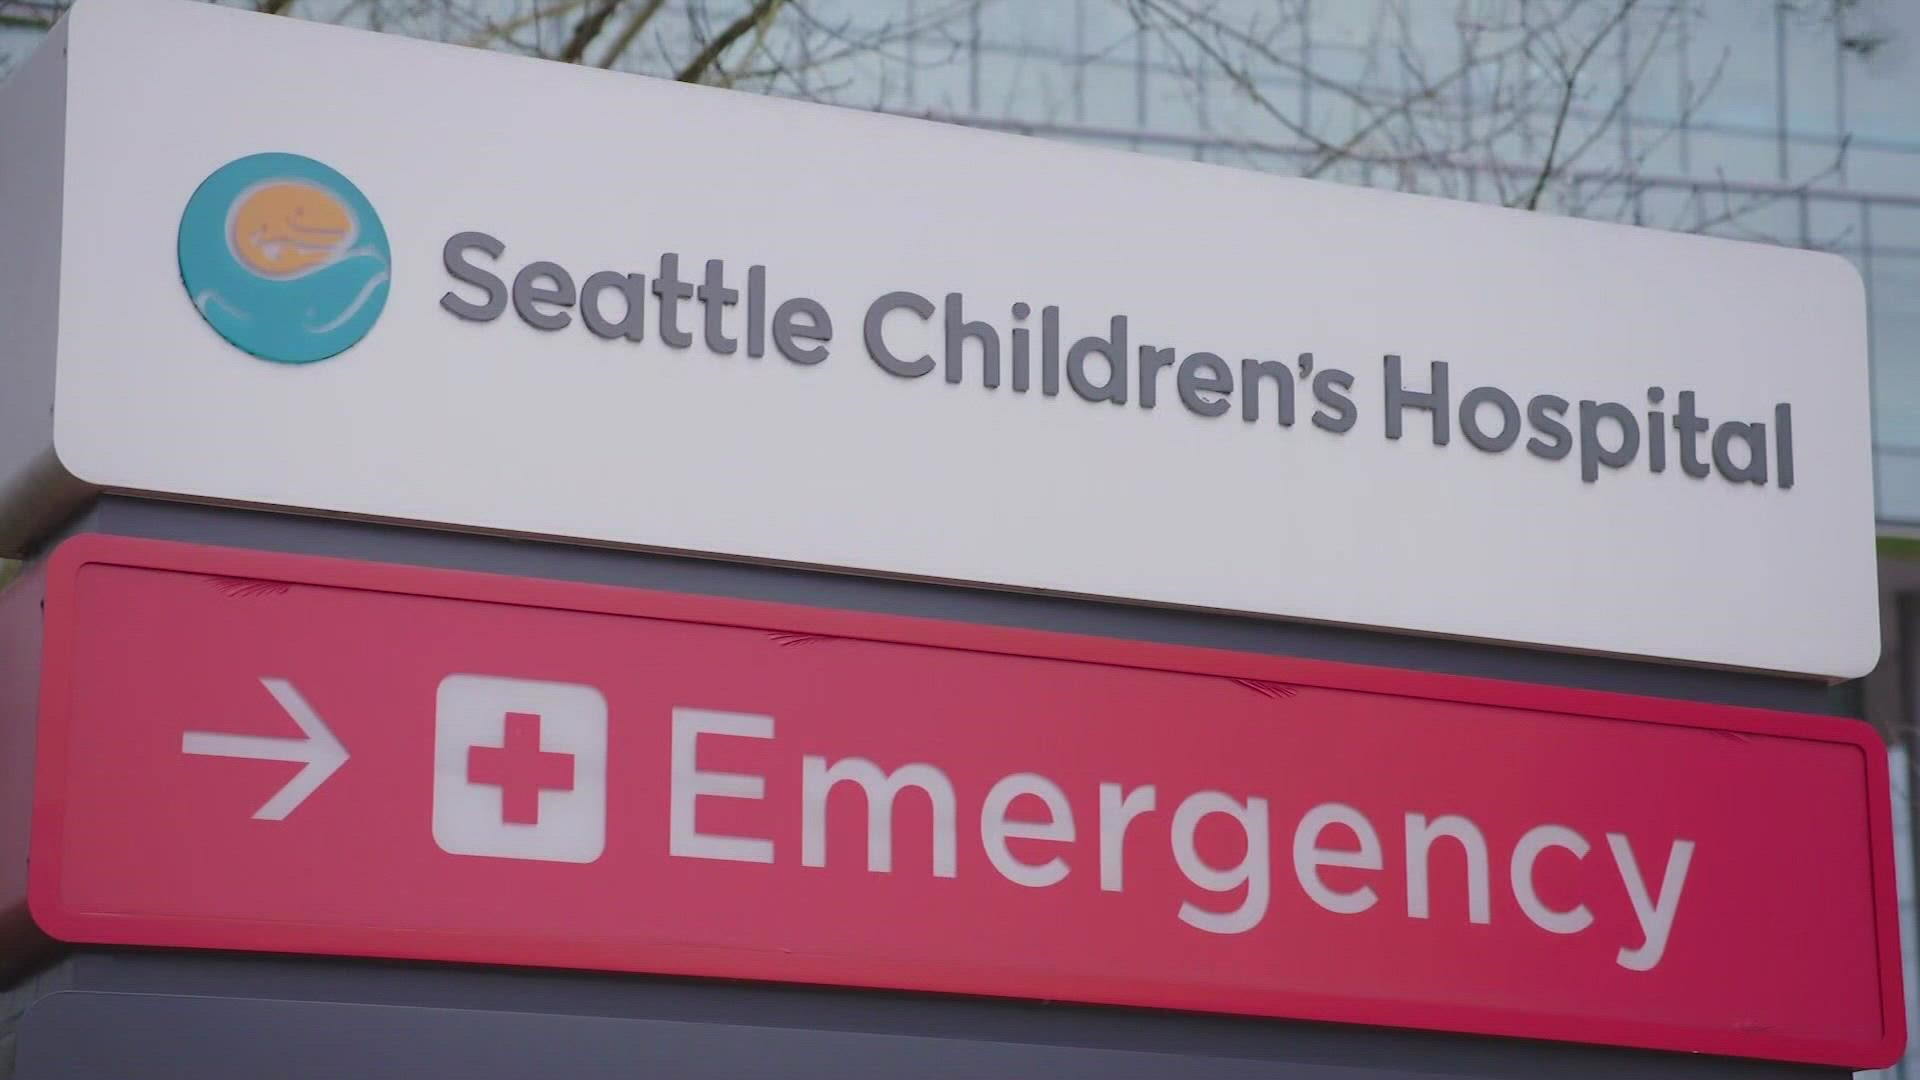 After the departure of a prominent doctor and months of investigation, Seattle Children’s hospital put out an “Action Plan” to become an anti-racist organization.